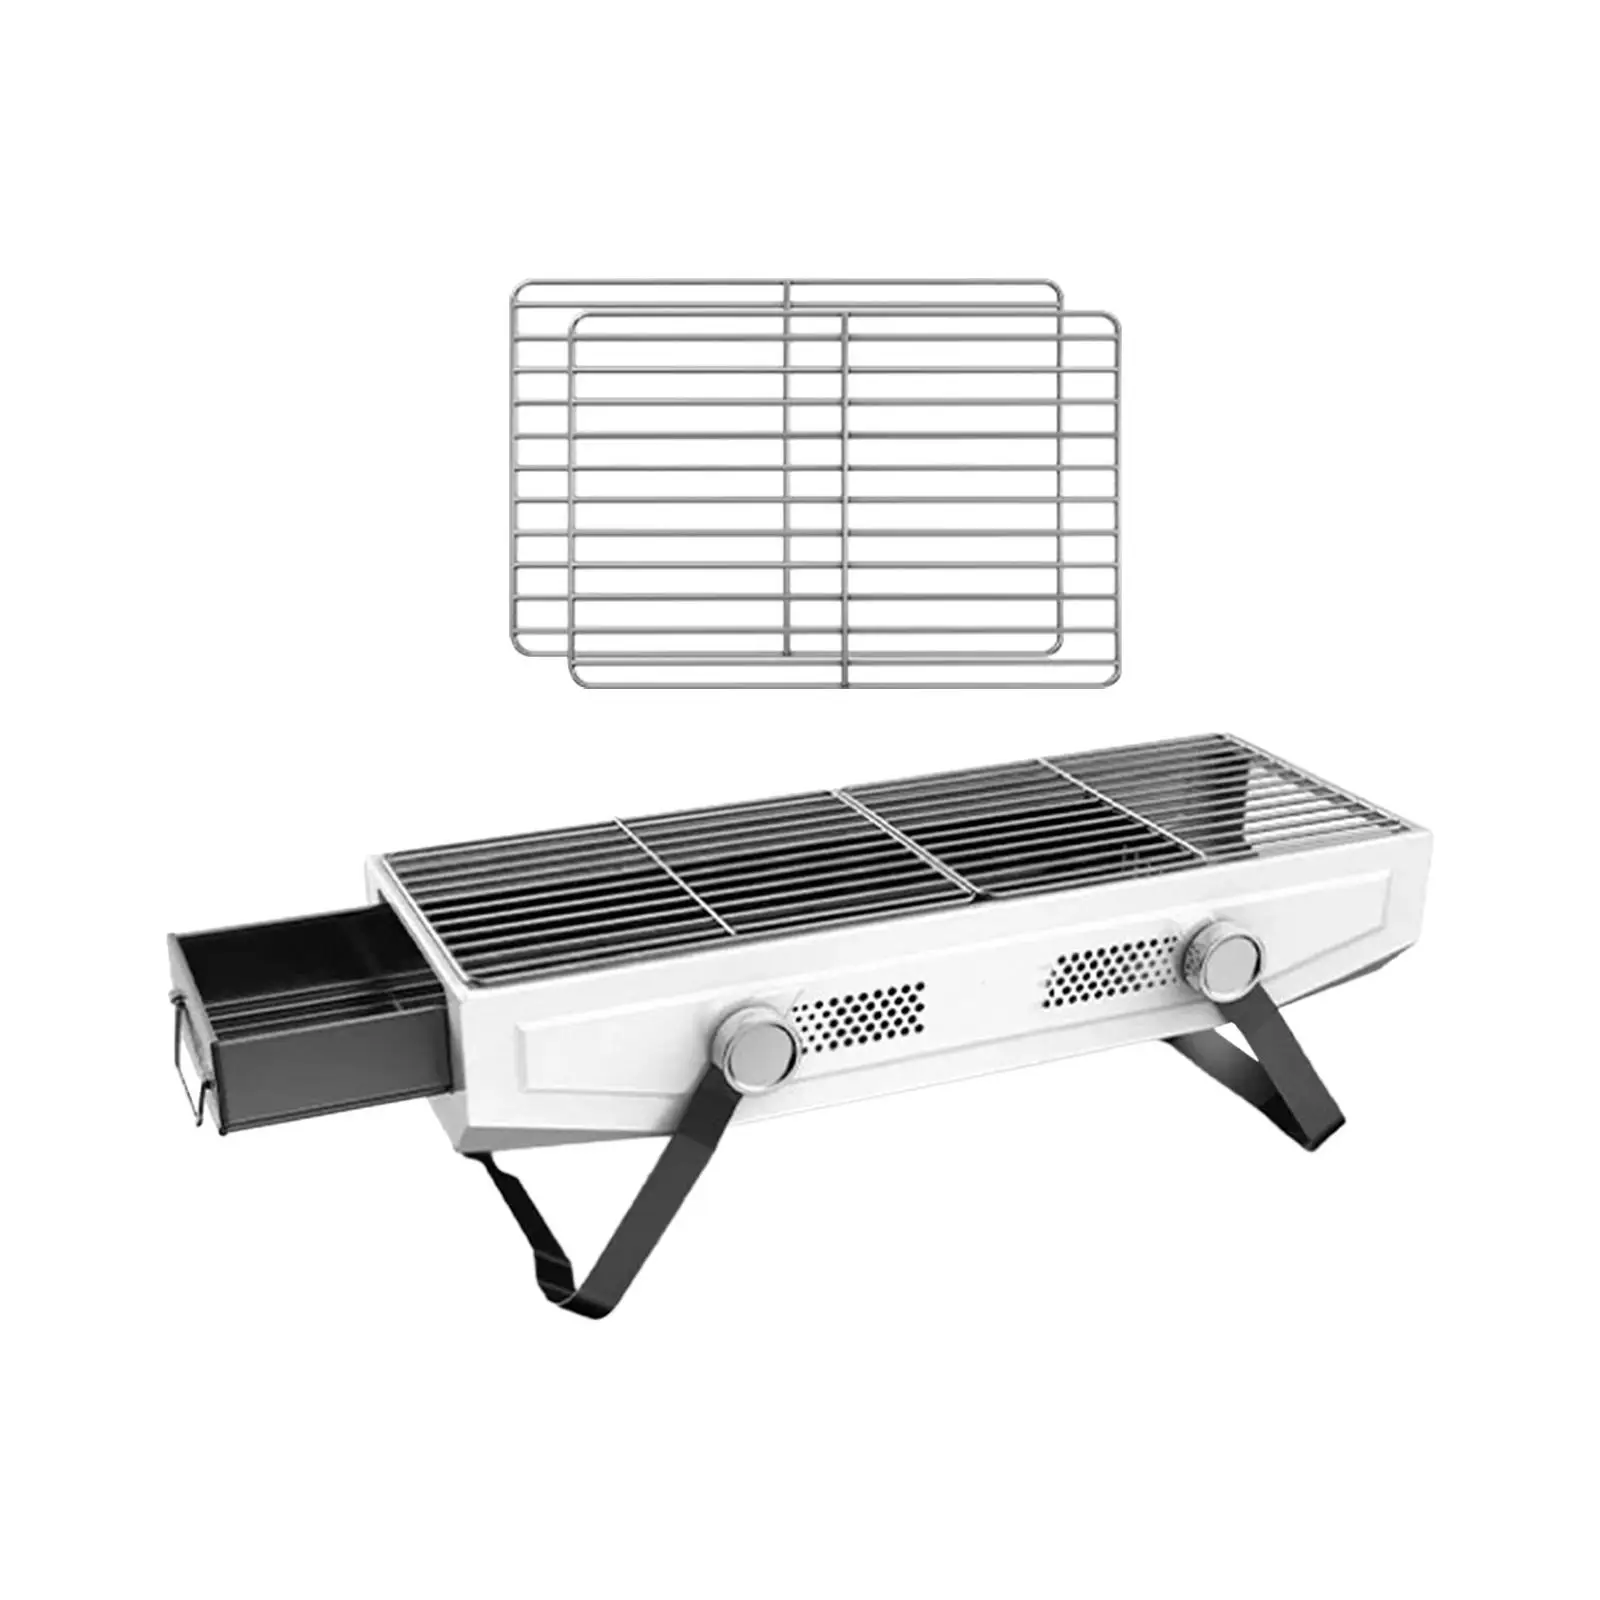 Barbecue Camping Grill Tabletop BBQ Grill Charcoal Wood Burning Grills Folding Grill for Backyard Garden Home Traveling Beach